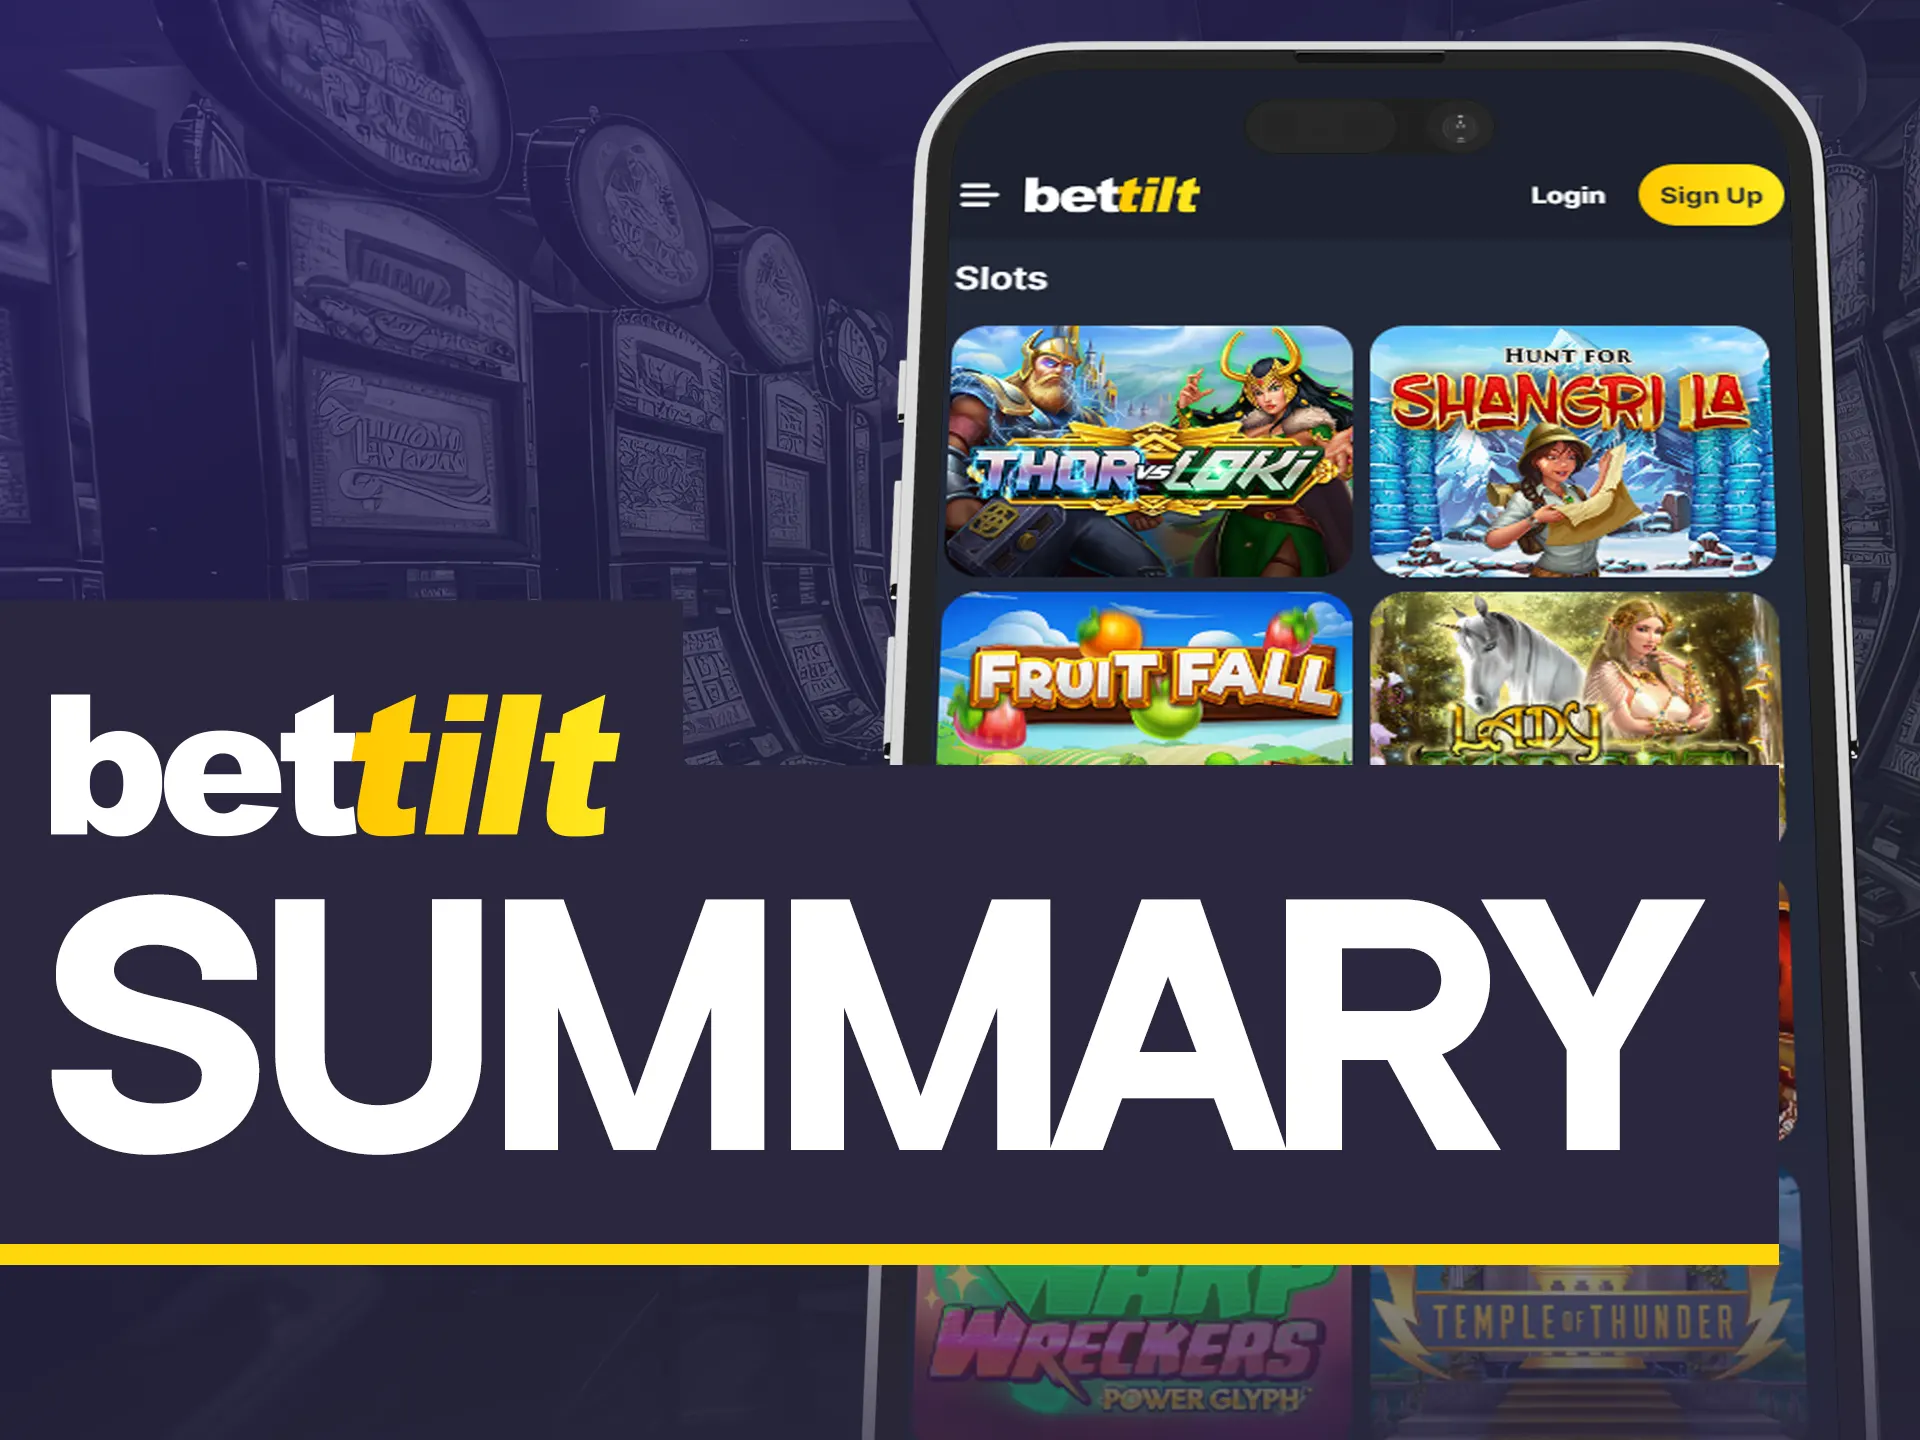 The Bettilt casino app offers diverse gaming options.